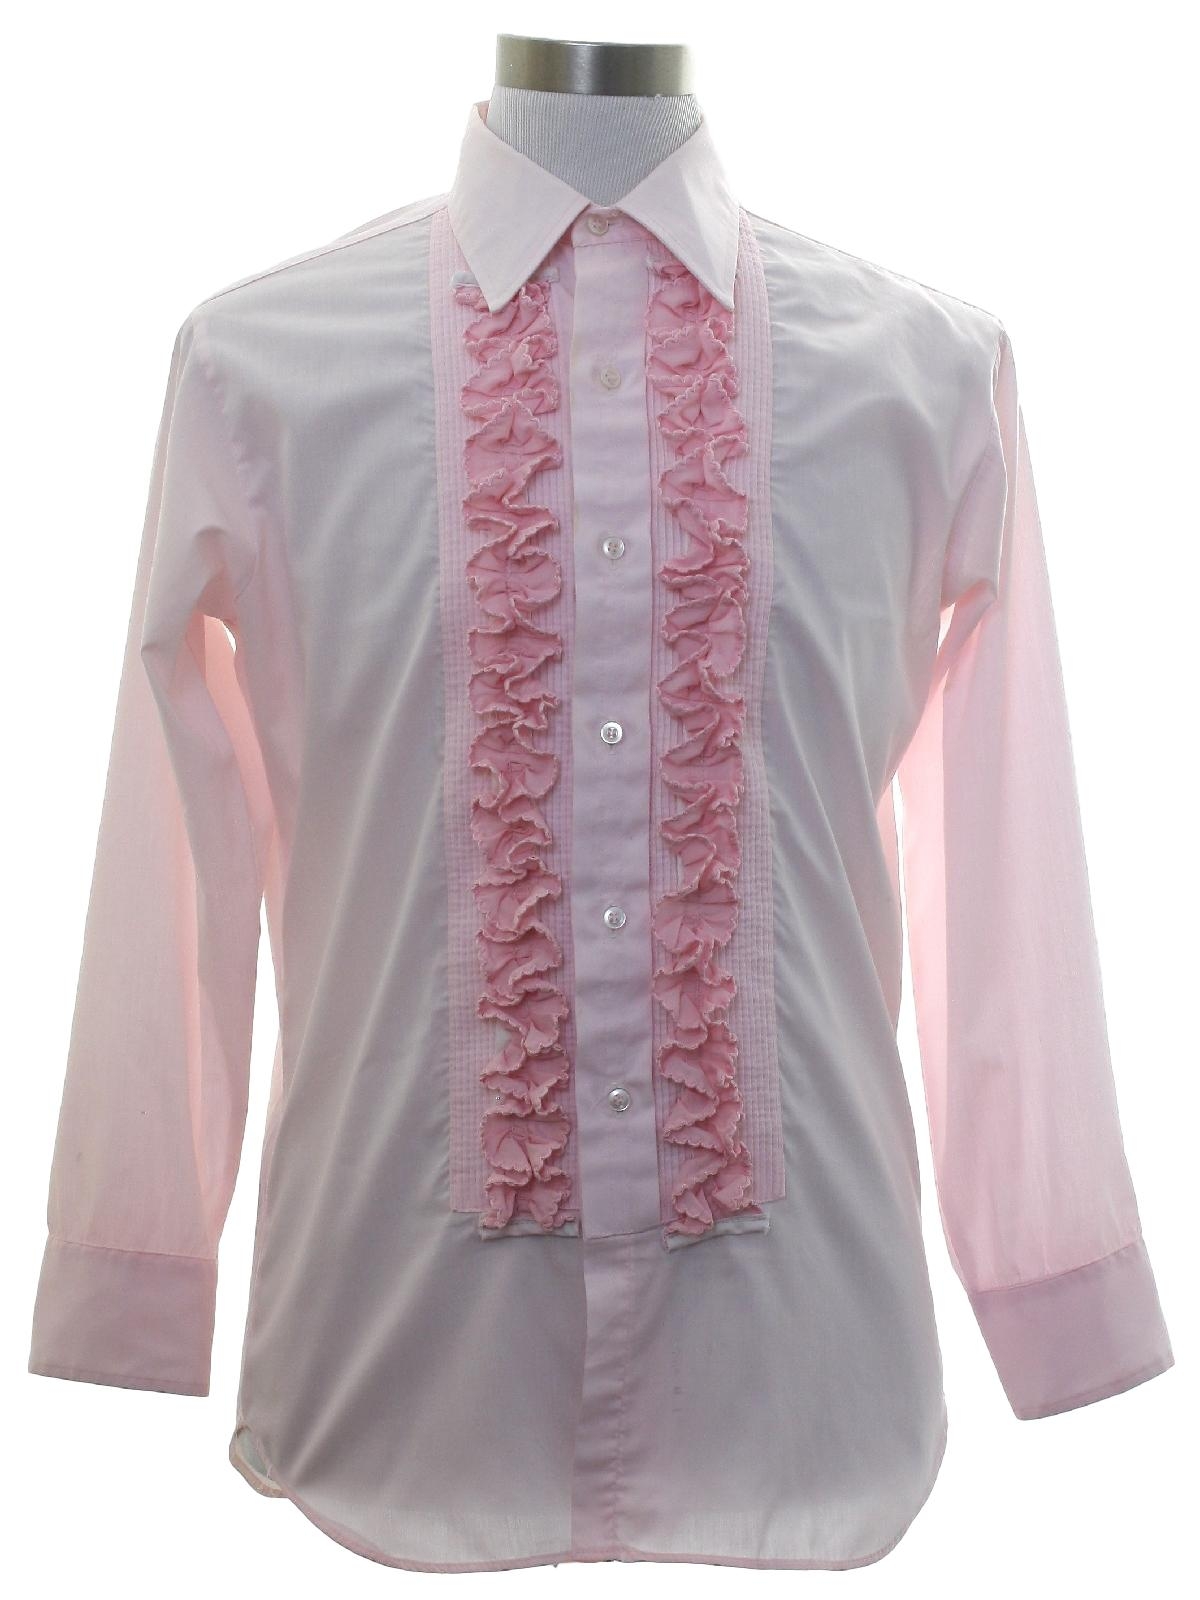 70s Retro Shirt: 70s -L and M Fashions- Mens pale pink background ...